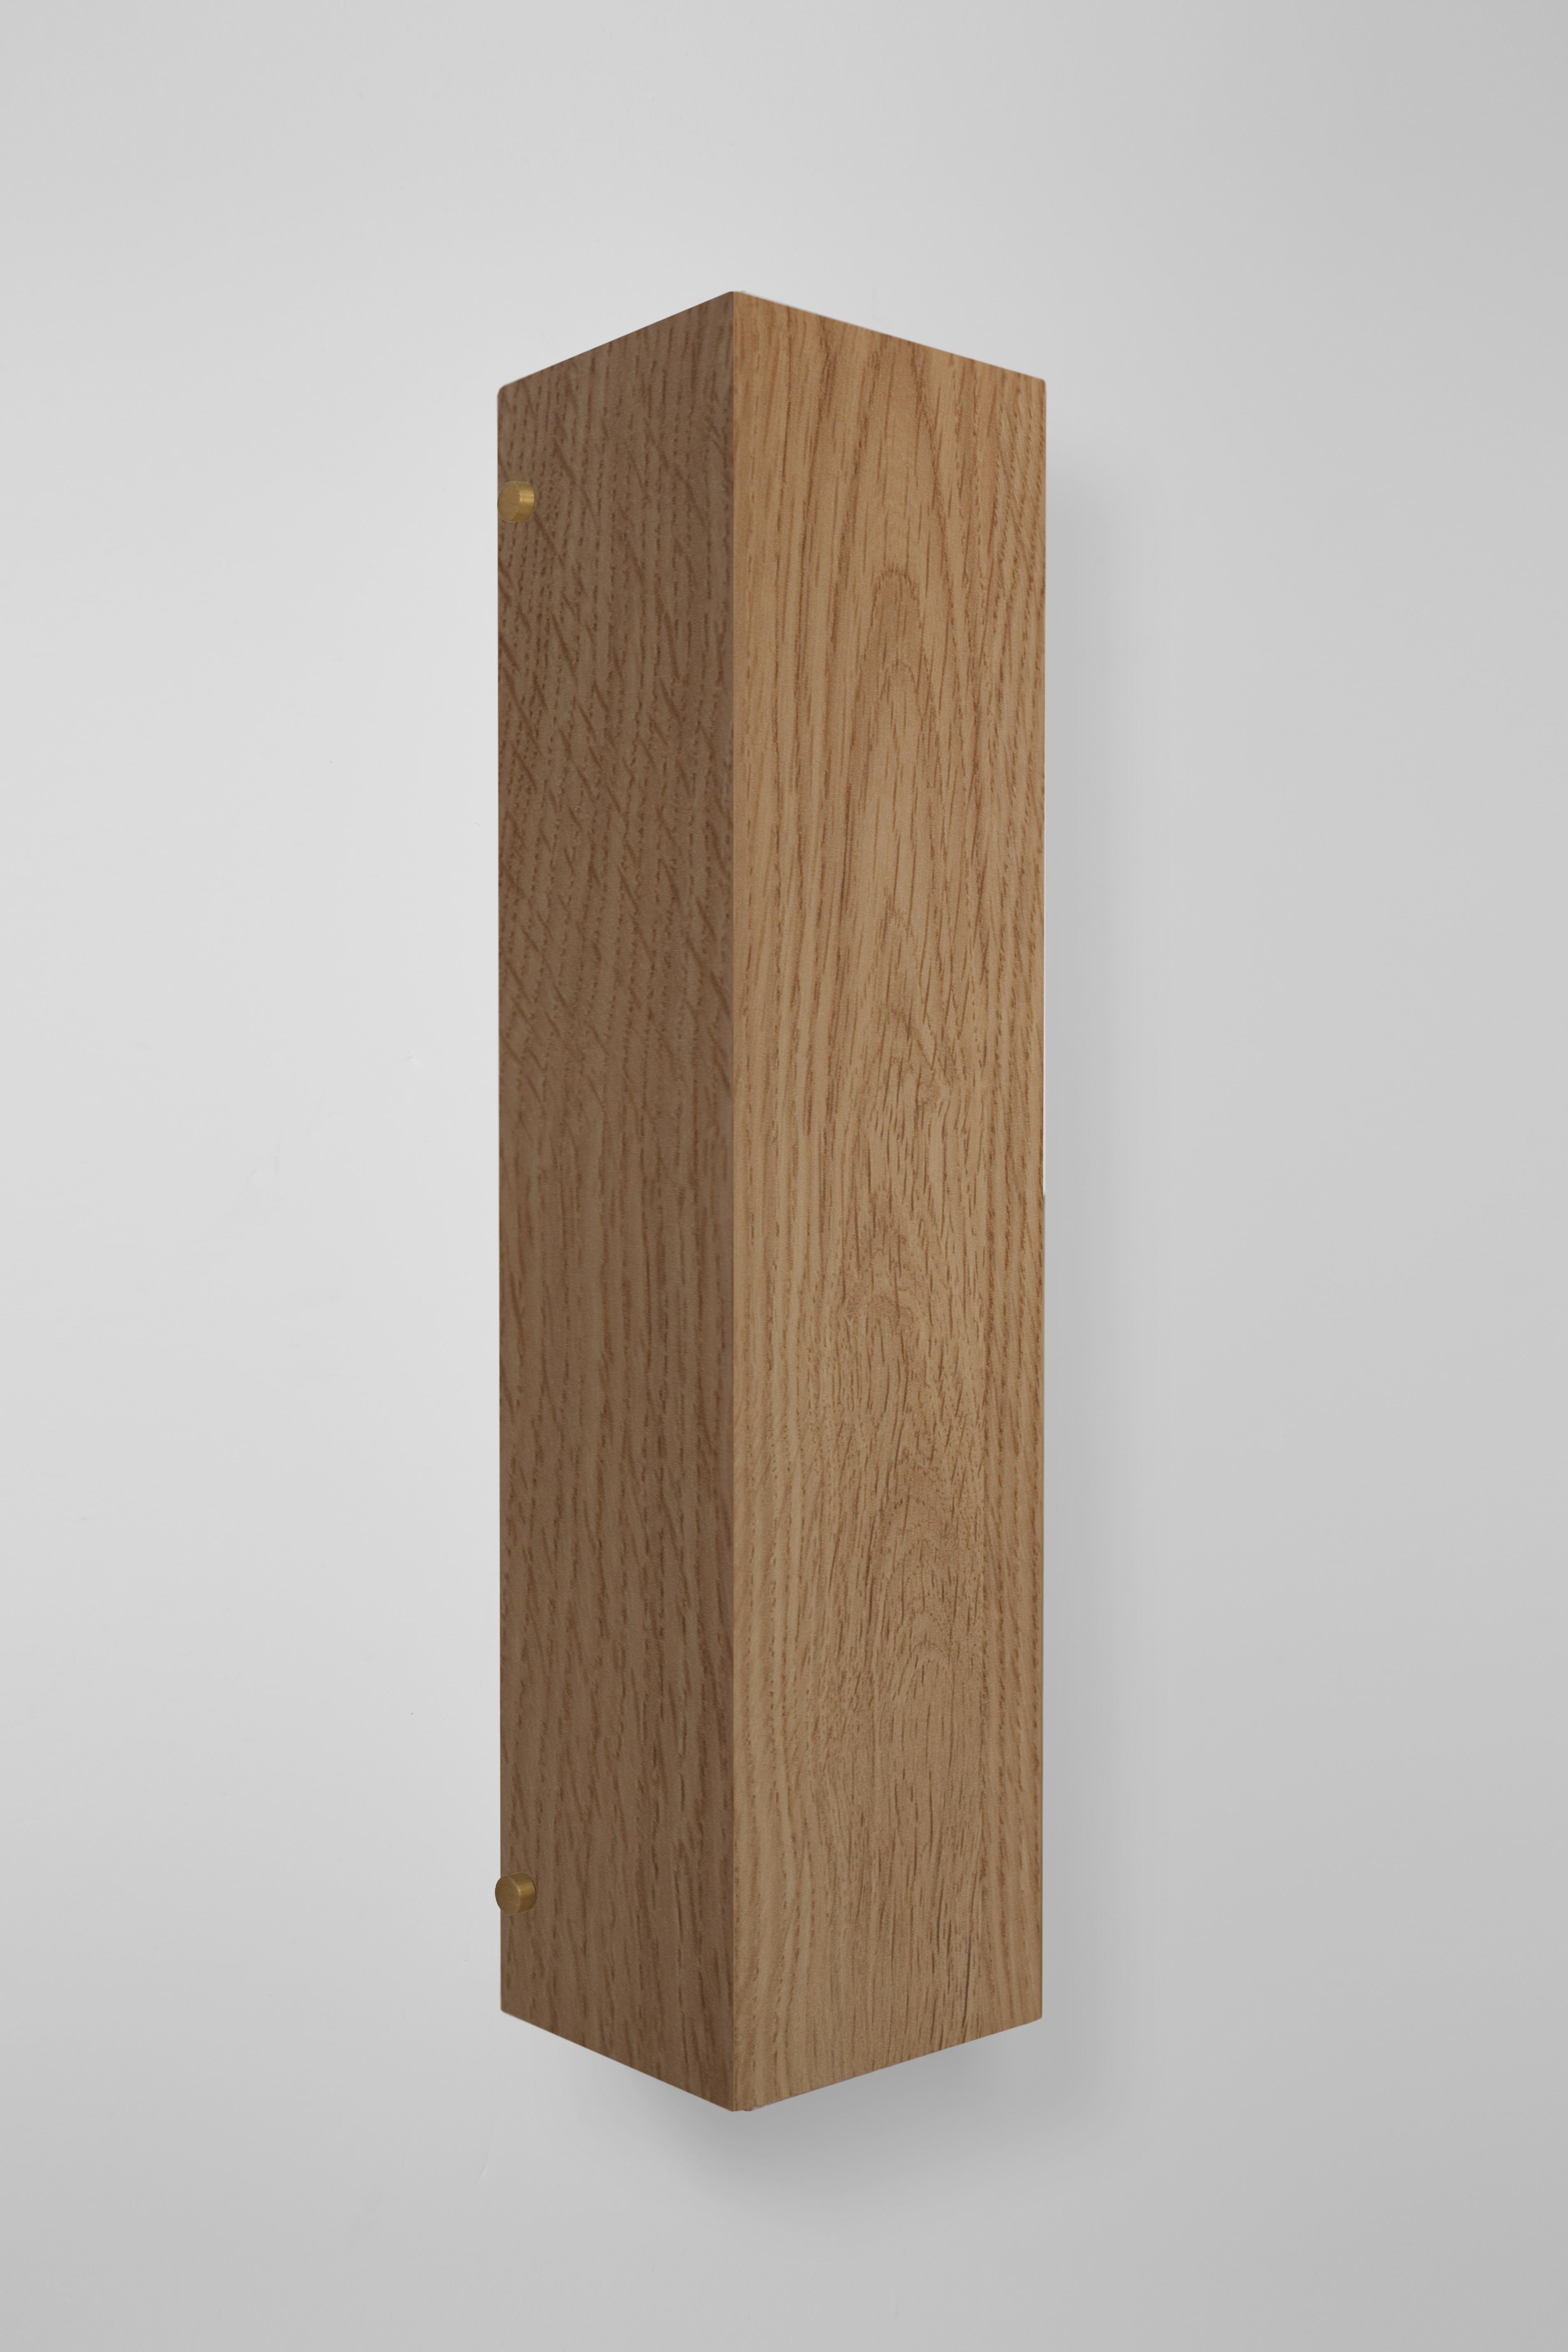 Orphan work 100W Sconce
Shown in oak with brushed brass. 
Available in natural oak with brushed or blackened brass.
Measures: 19”H x 4 3/4